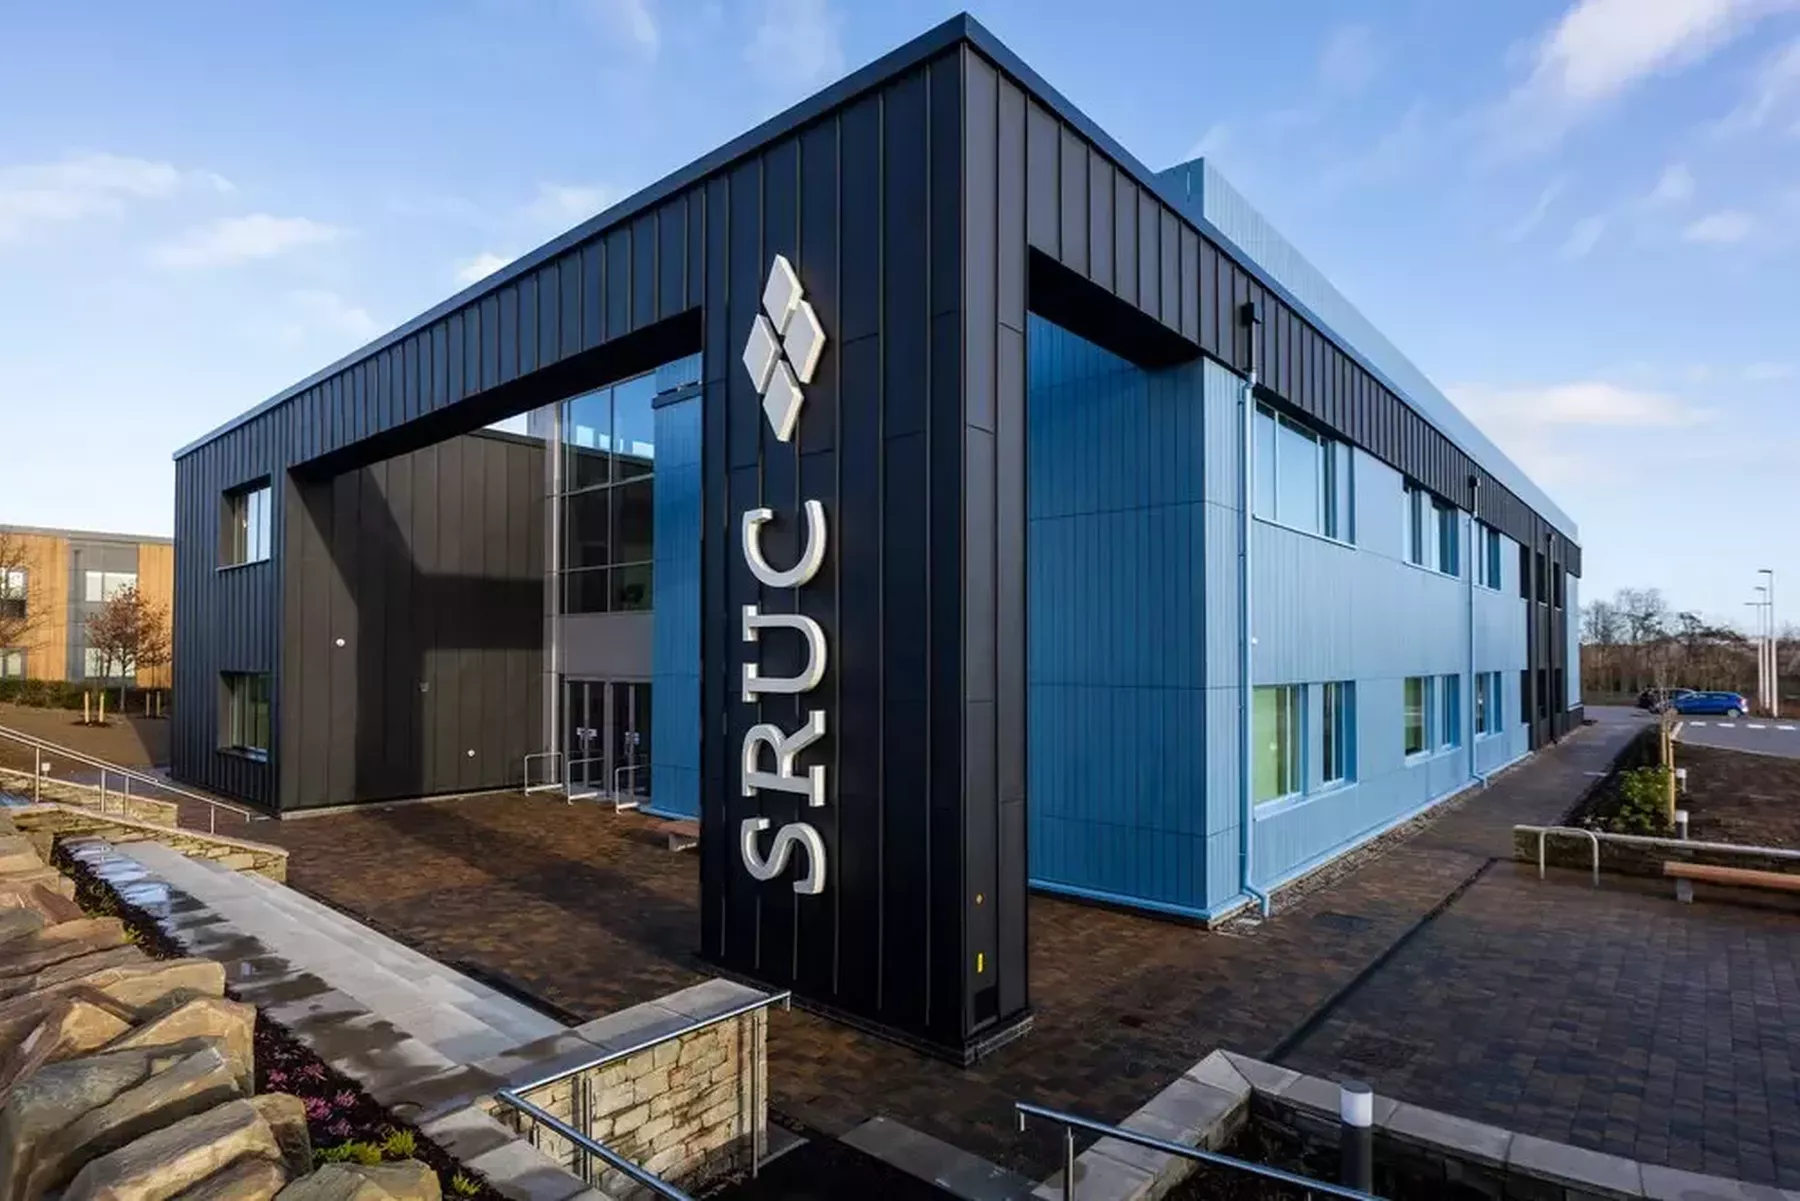 External photograph of the Rural and Veterinary Innovation Centre, a blue building with large SRUC logo on front